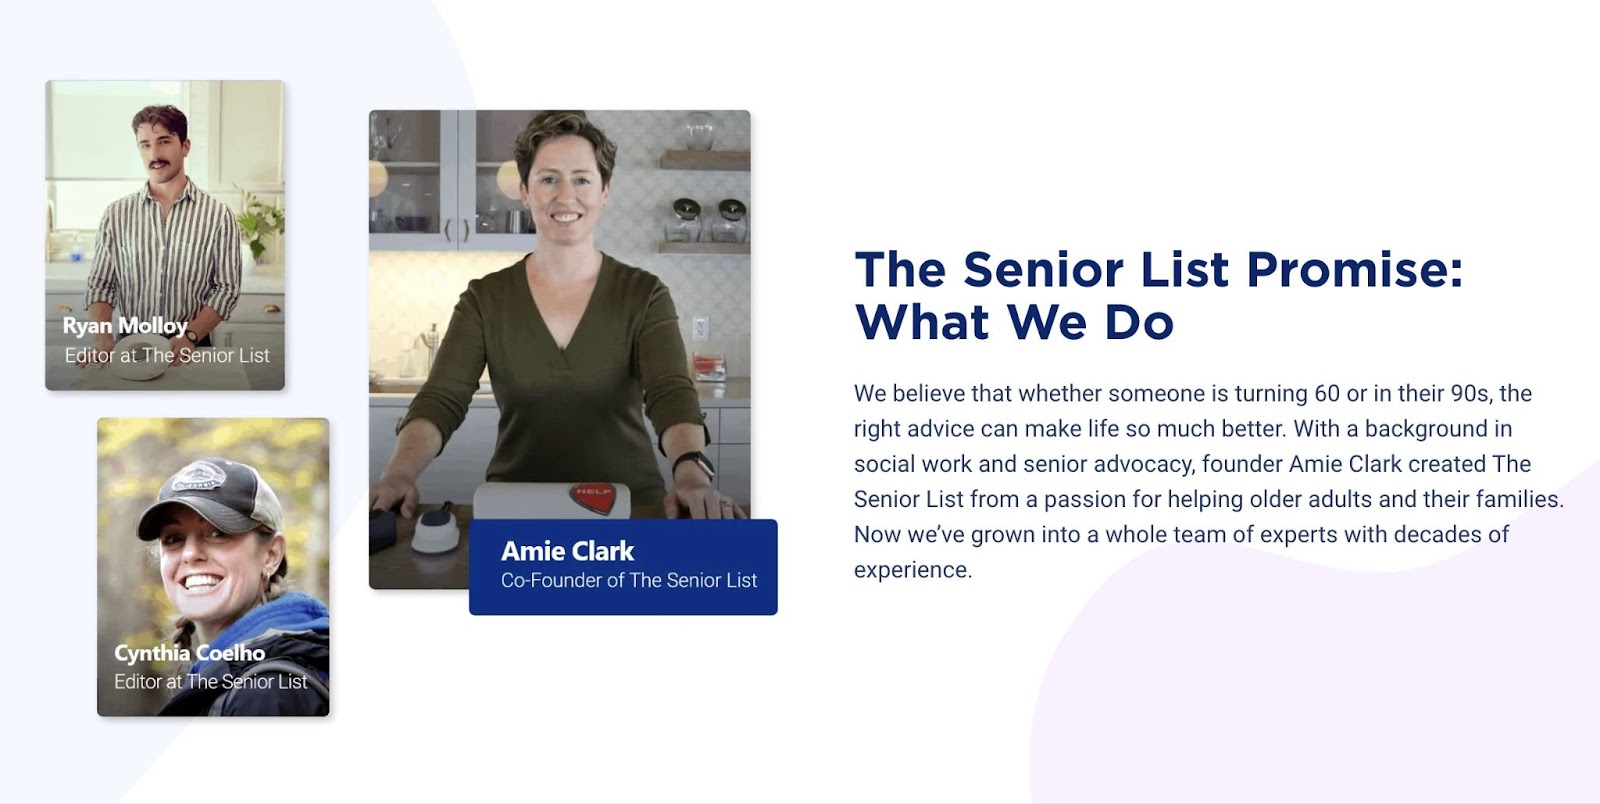 "The Senior List Promise: What We Do" section of the site